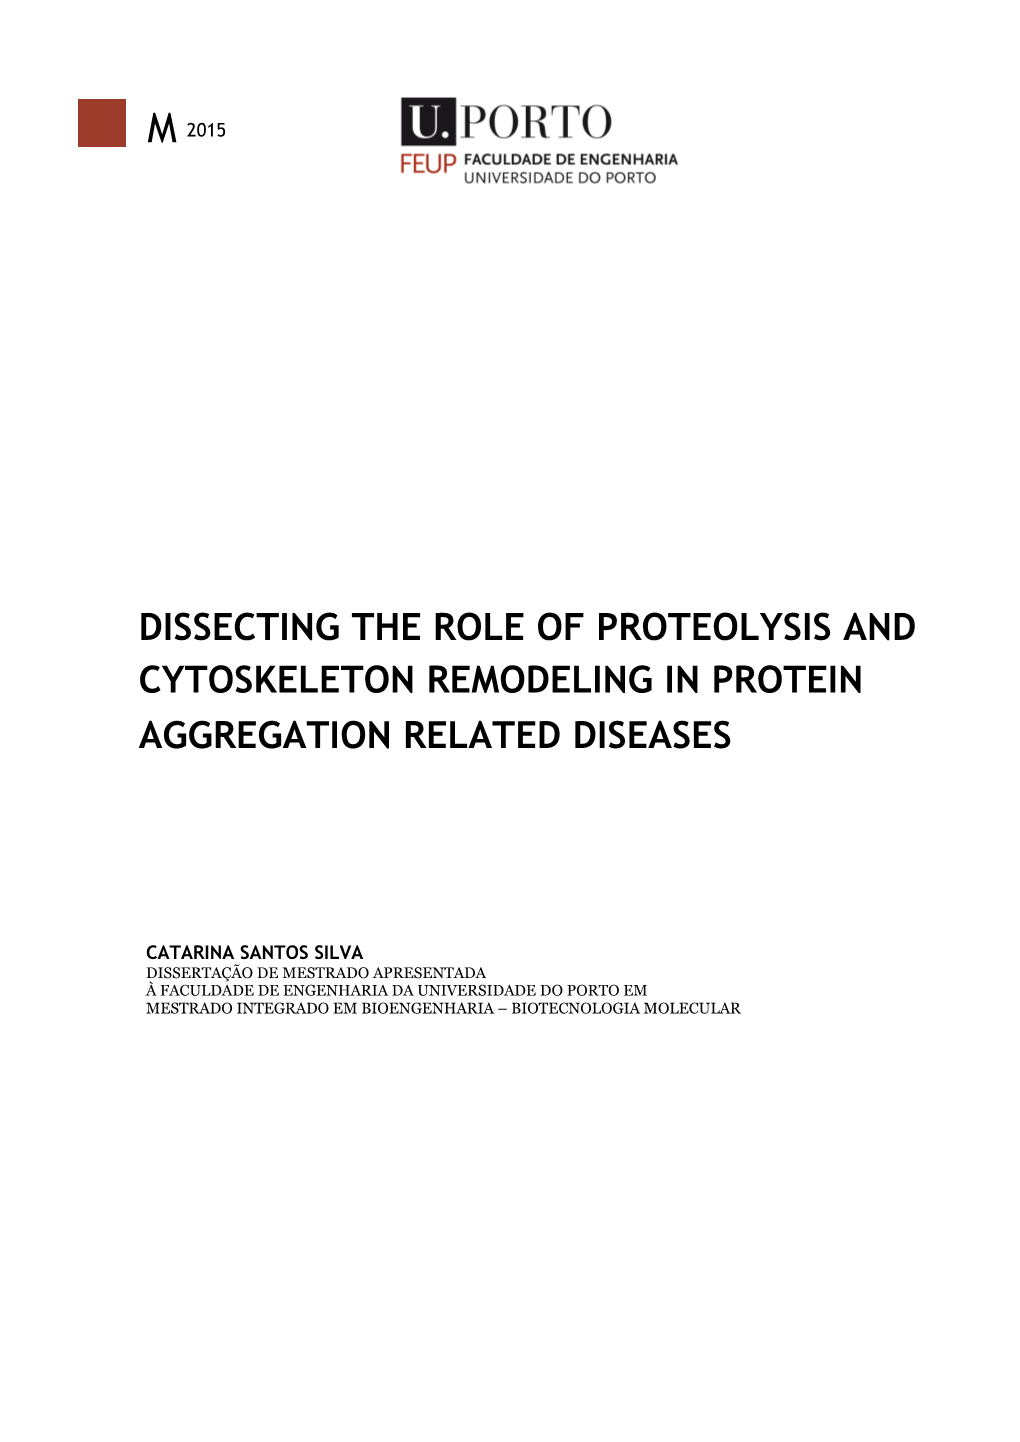 Dissecting the Role of Proteolysis and Cytoskeleton Remodeling in Protein Aggregation Related Diseases